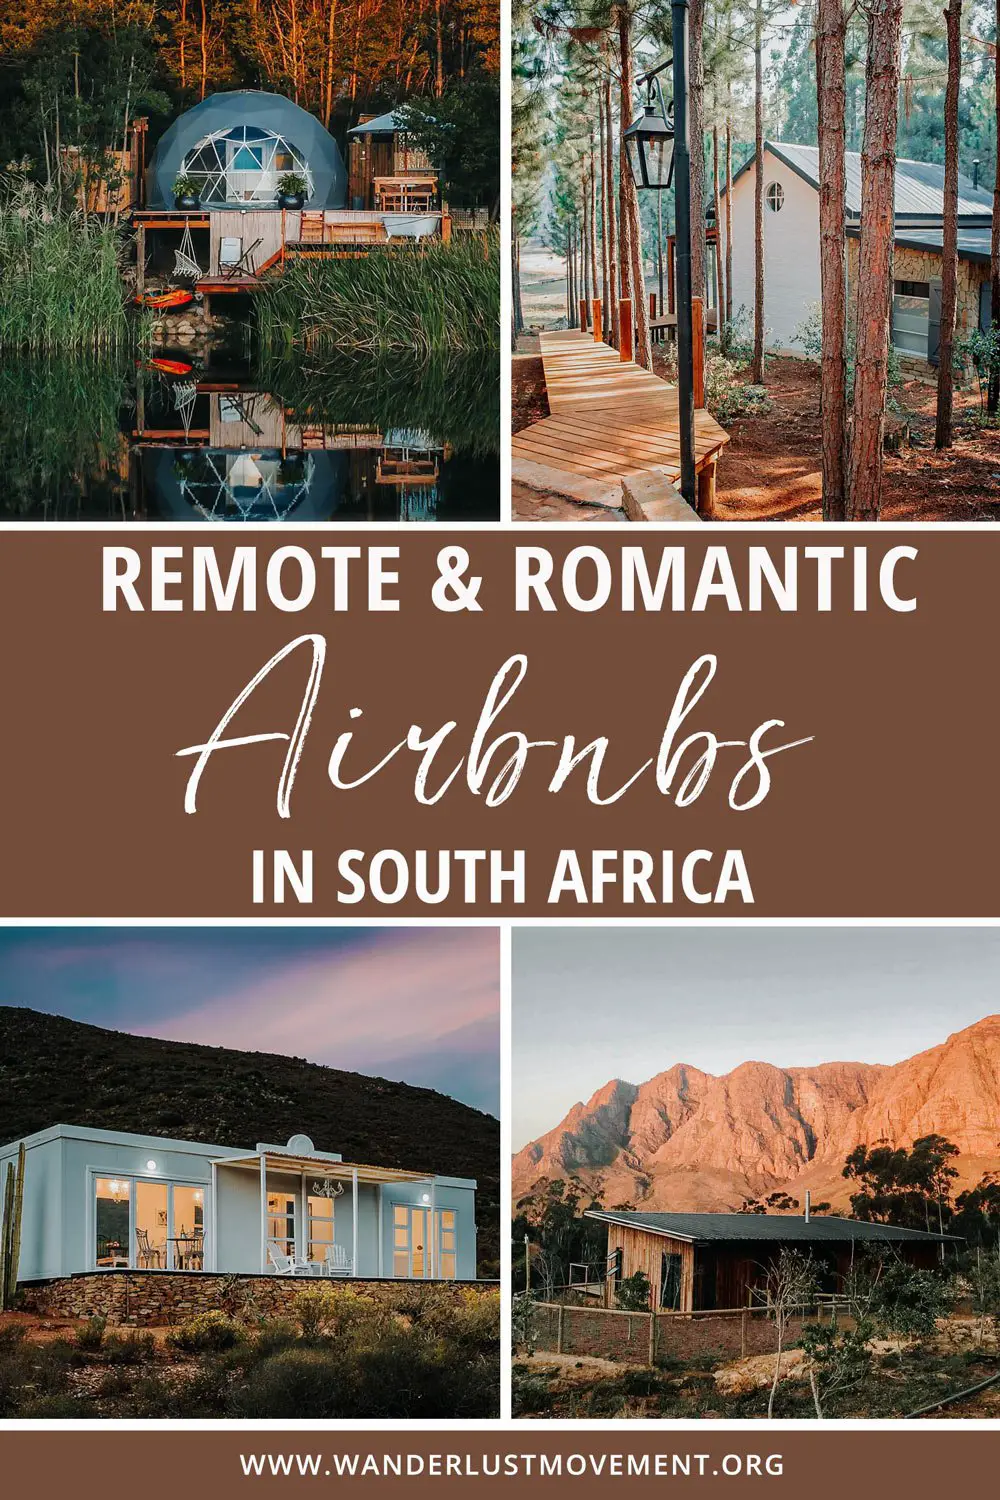 The Most Secluded & Romantic Airbnbs in South Africa